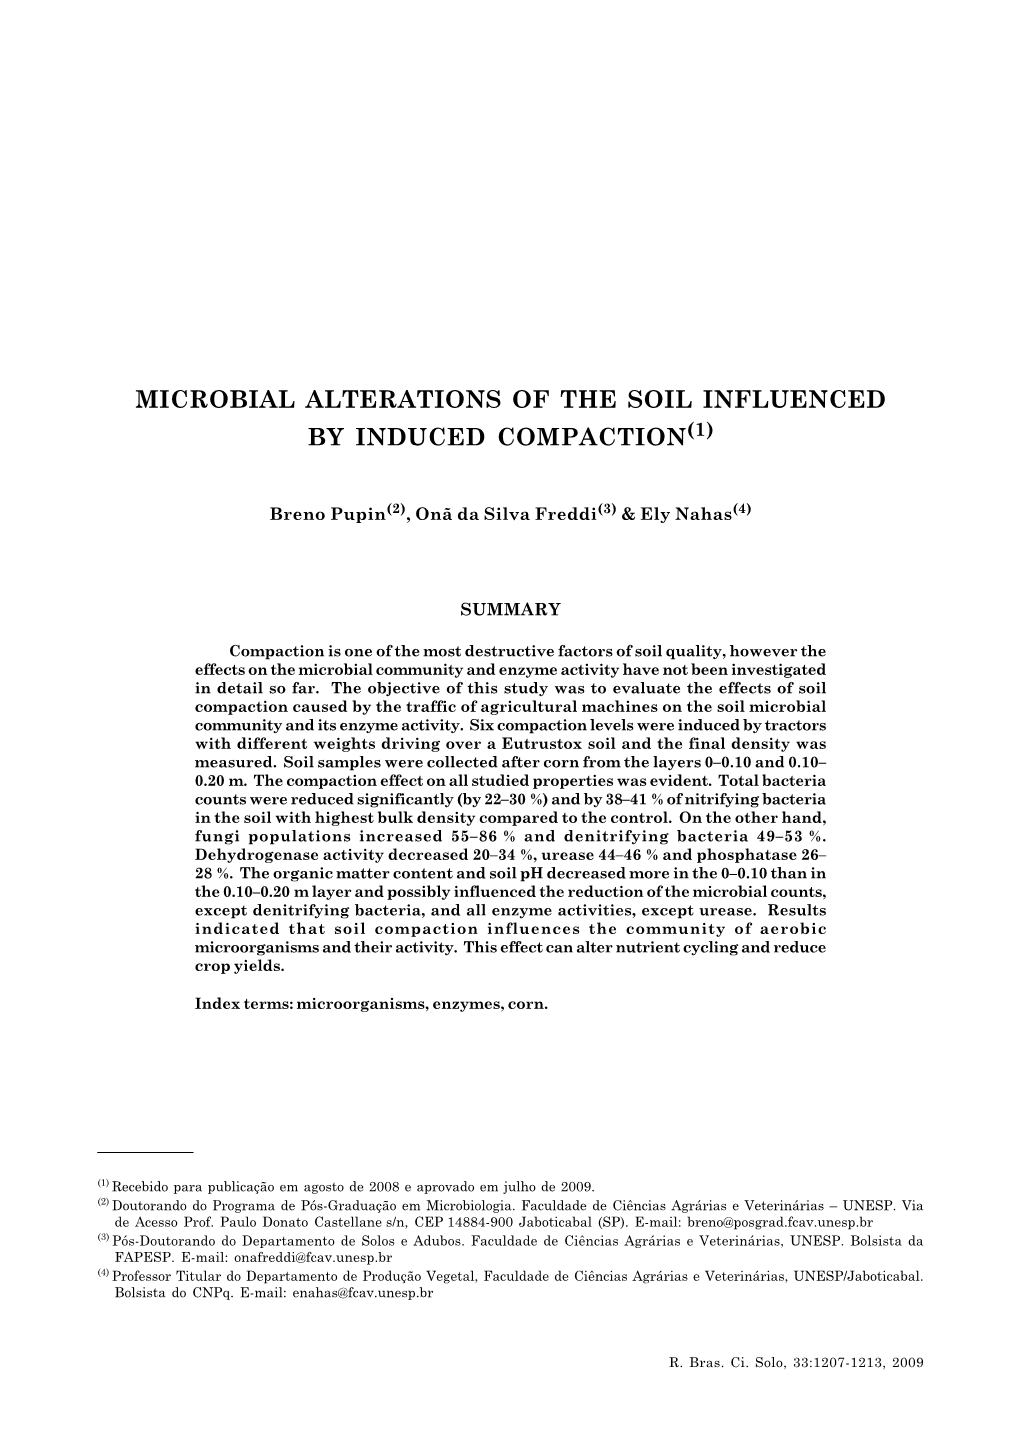 Microbial Alterations of the Soil Influenced by Induced Compaction 1207